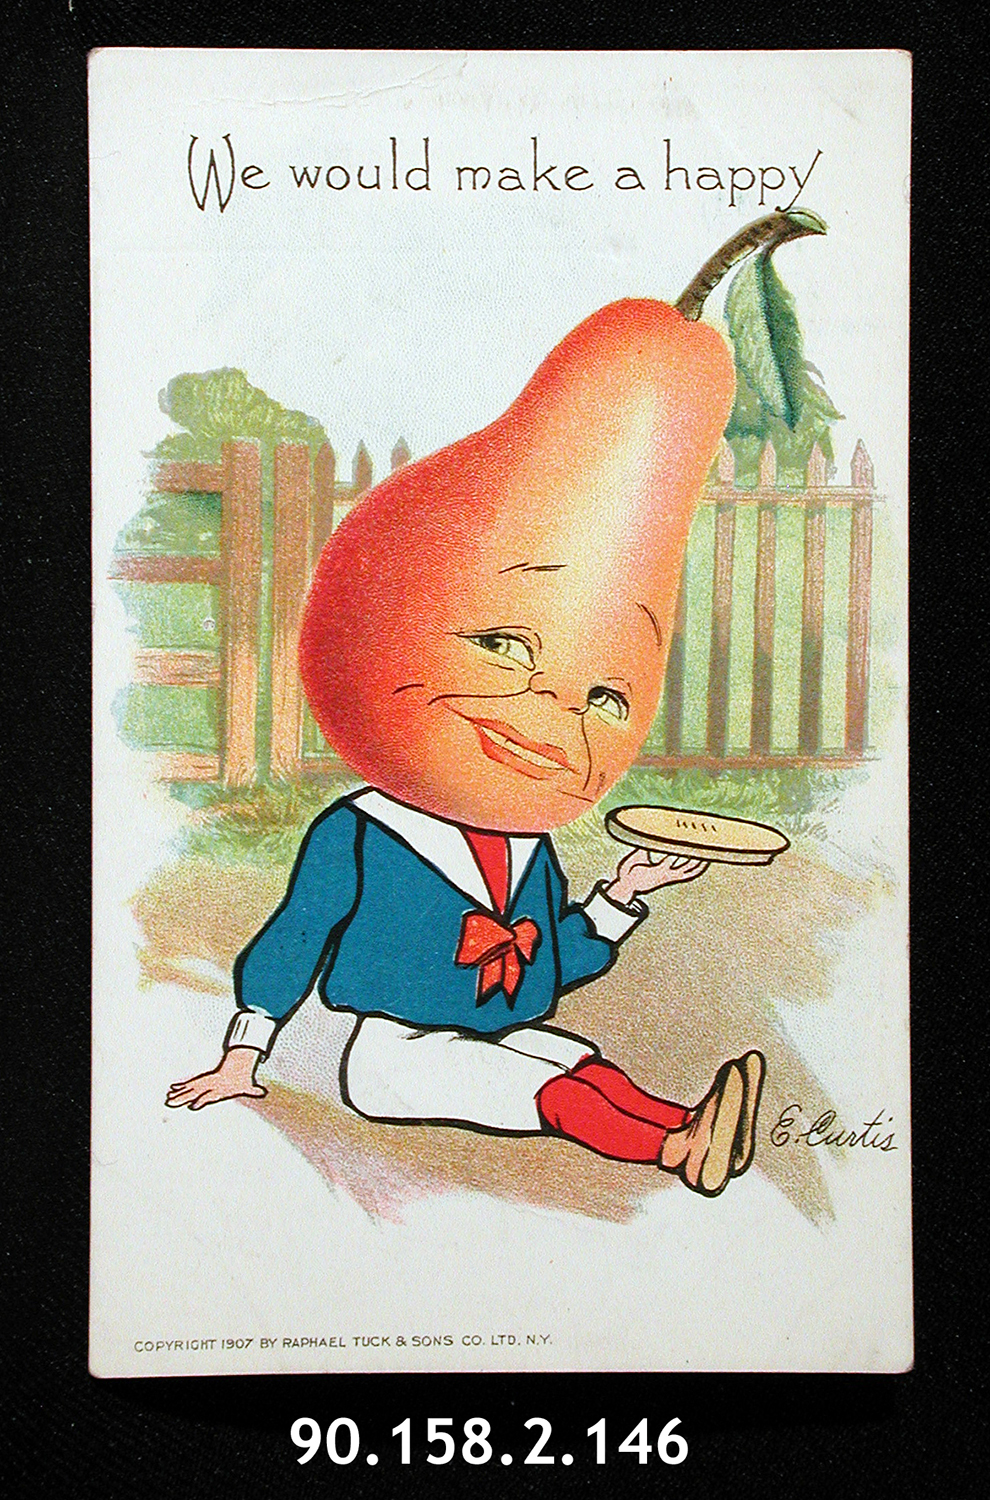 A Valentine postcard depicting a boy with a pear for a head. It reads: "We would make a happy [pair]."